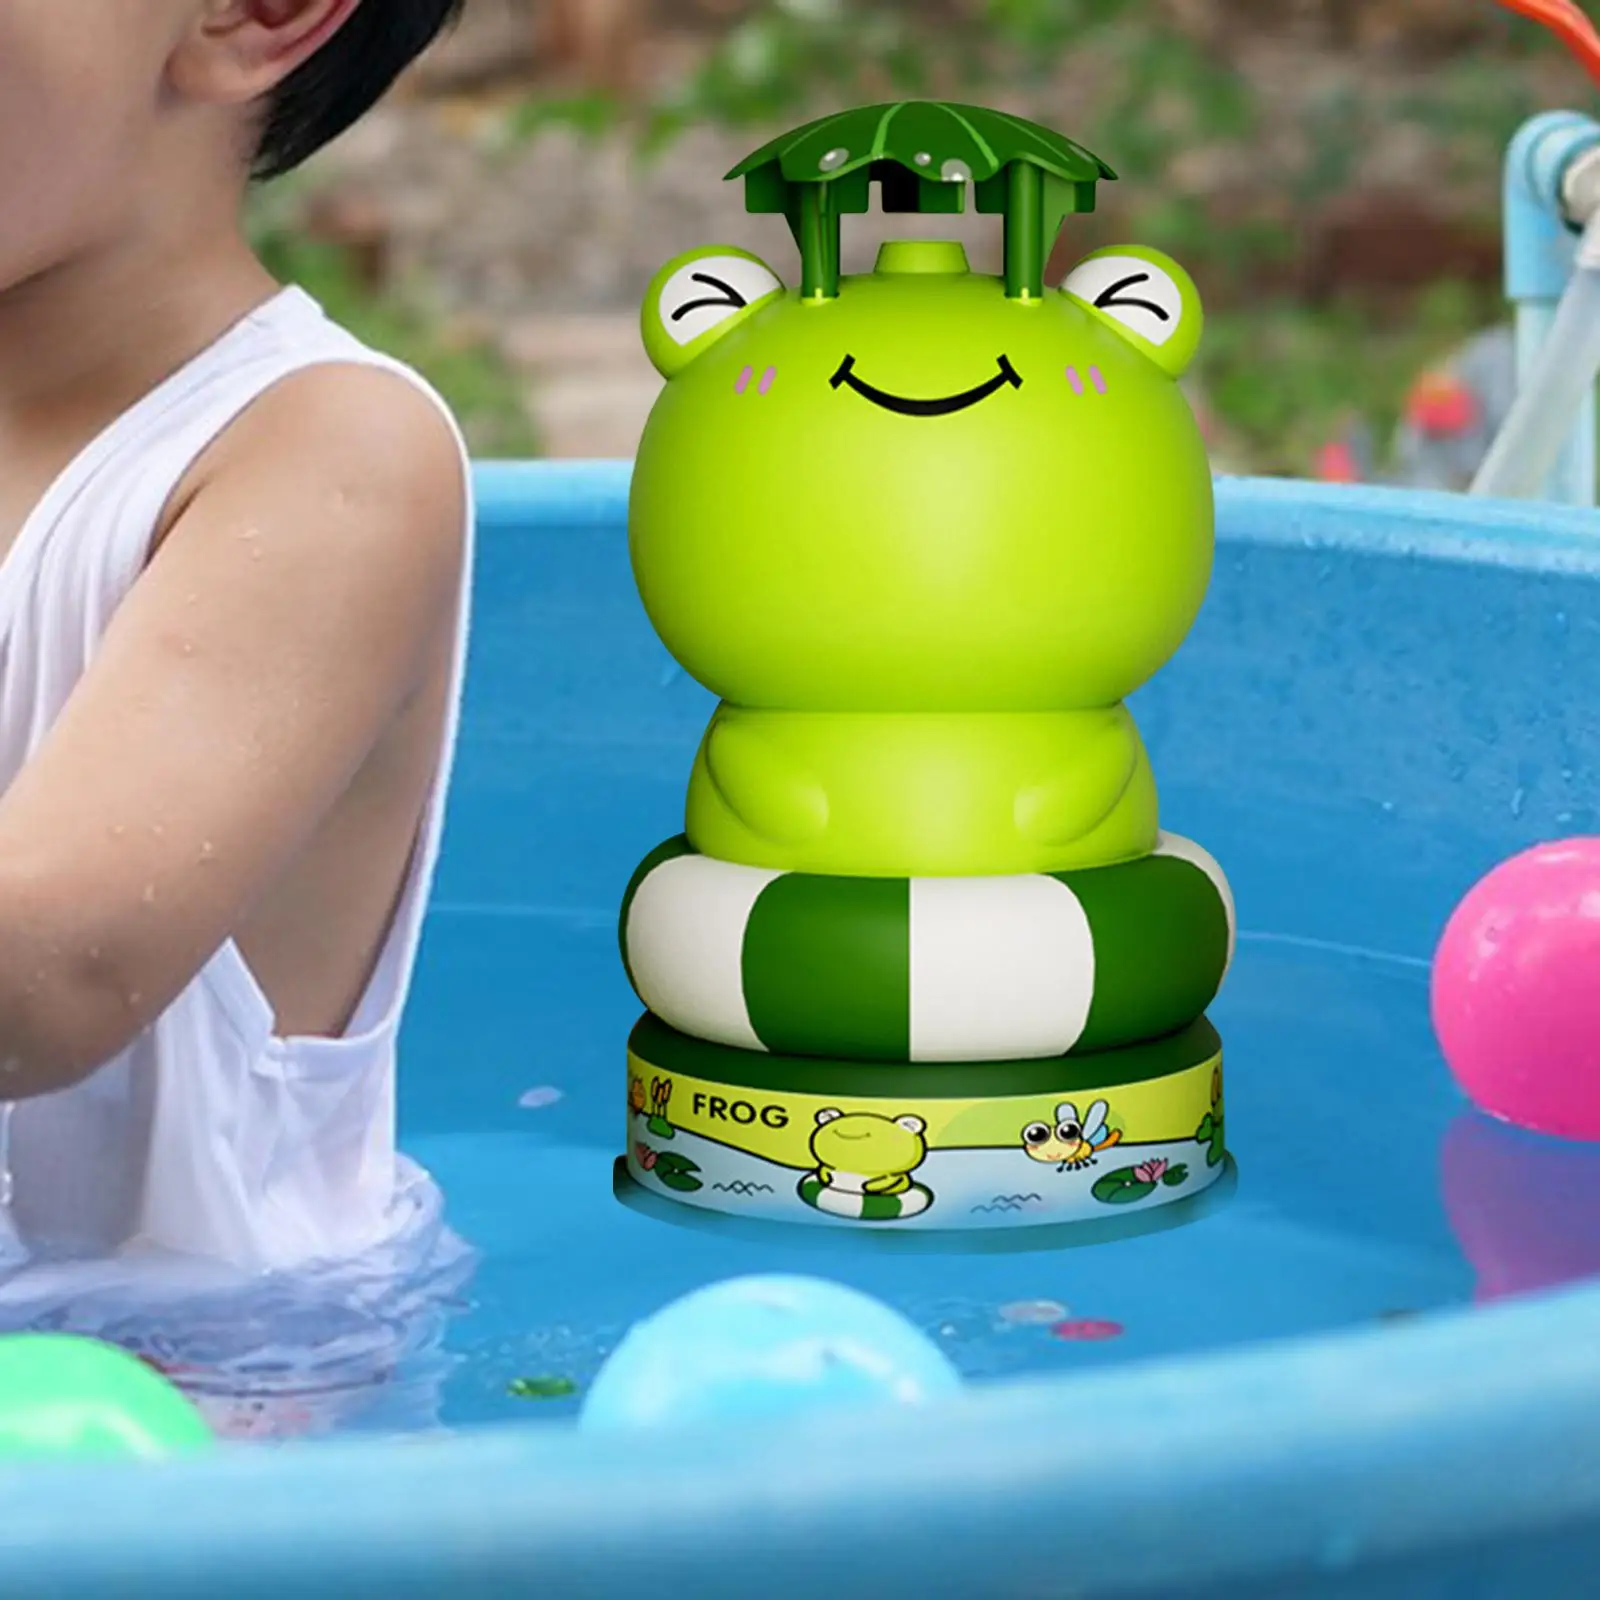 Summer Launcher Sprinkler Toy 360° Rotating Games Fun Interaction Animal Shape Water Toys for Patio Lawn Yard Garden